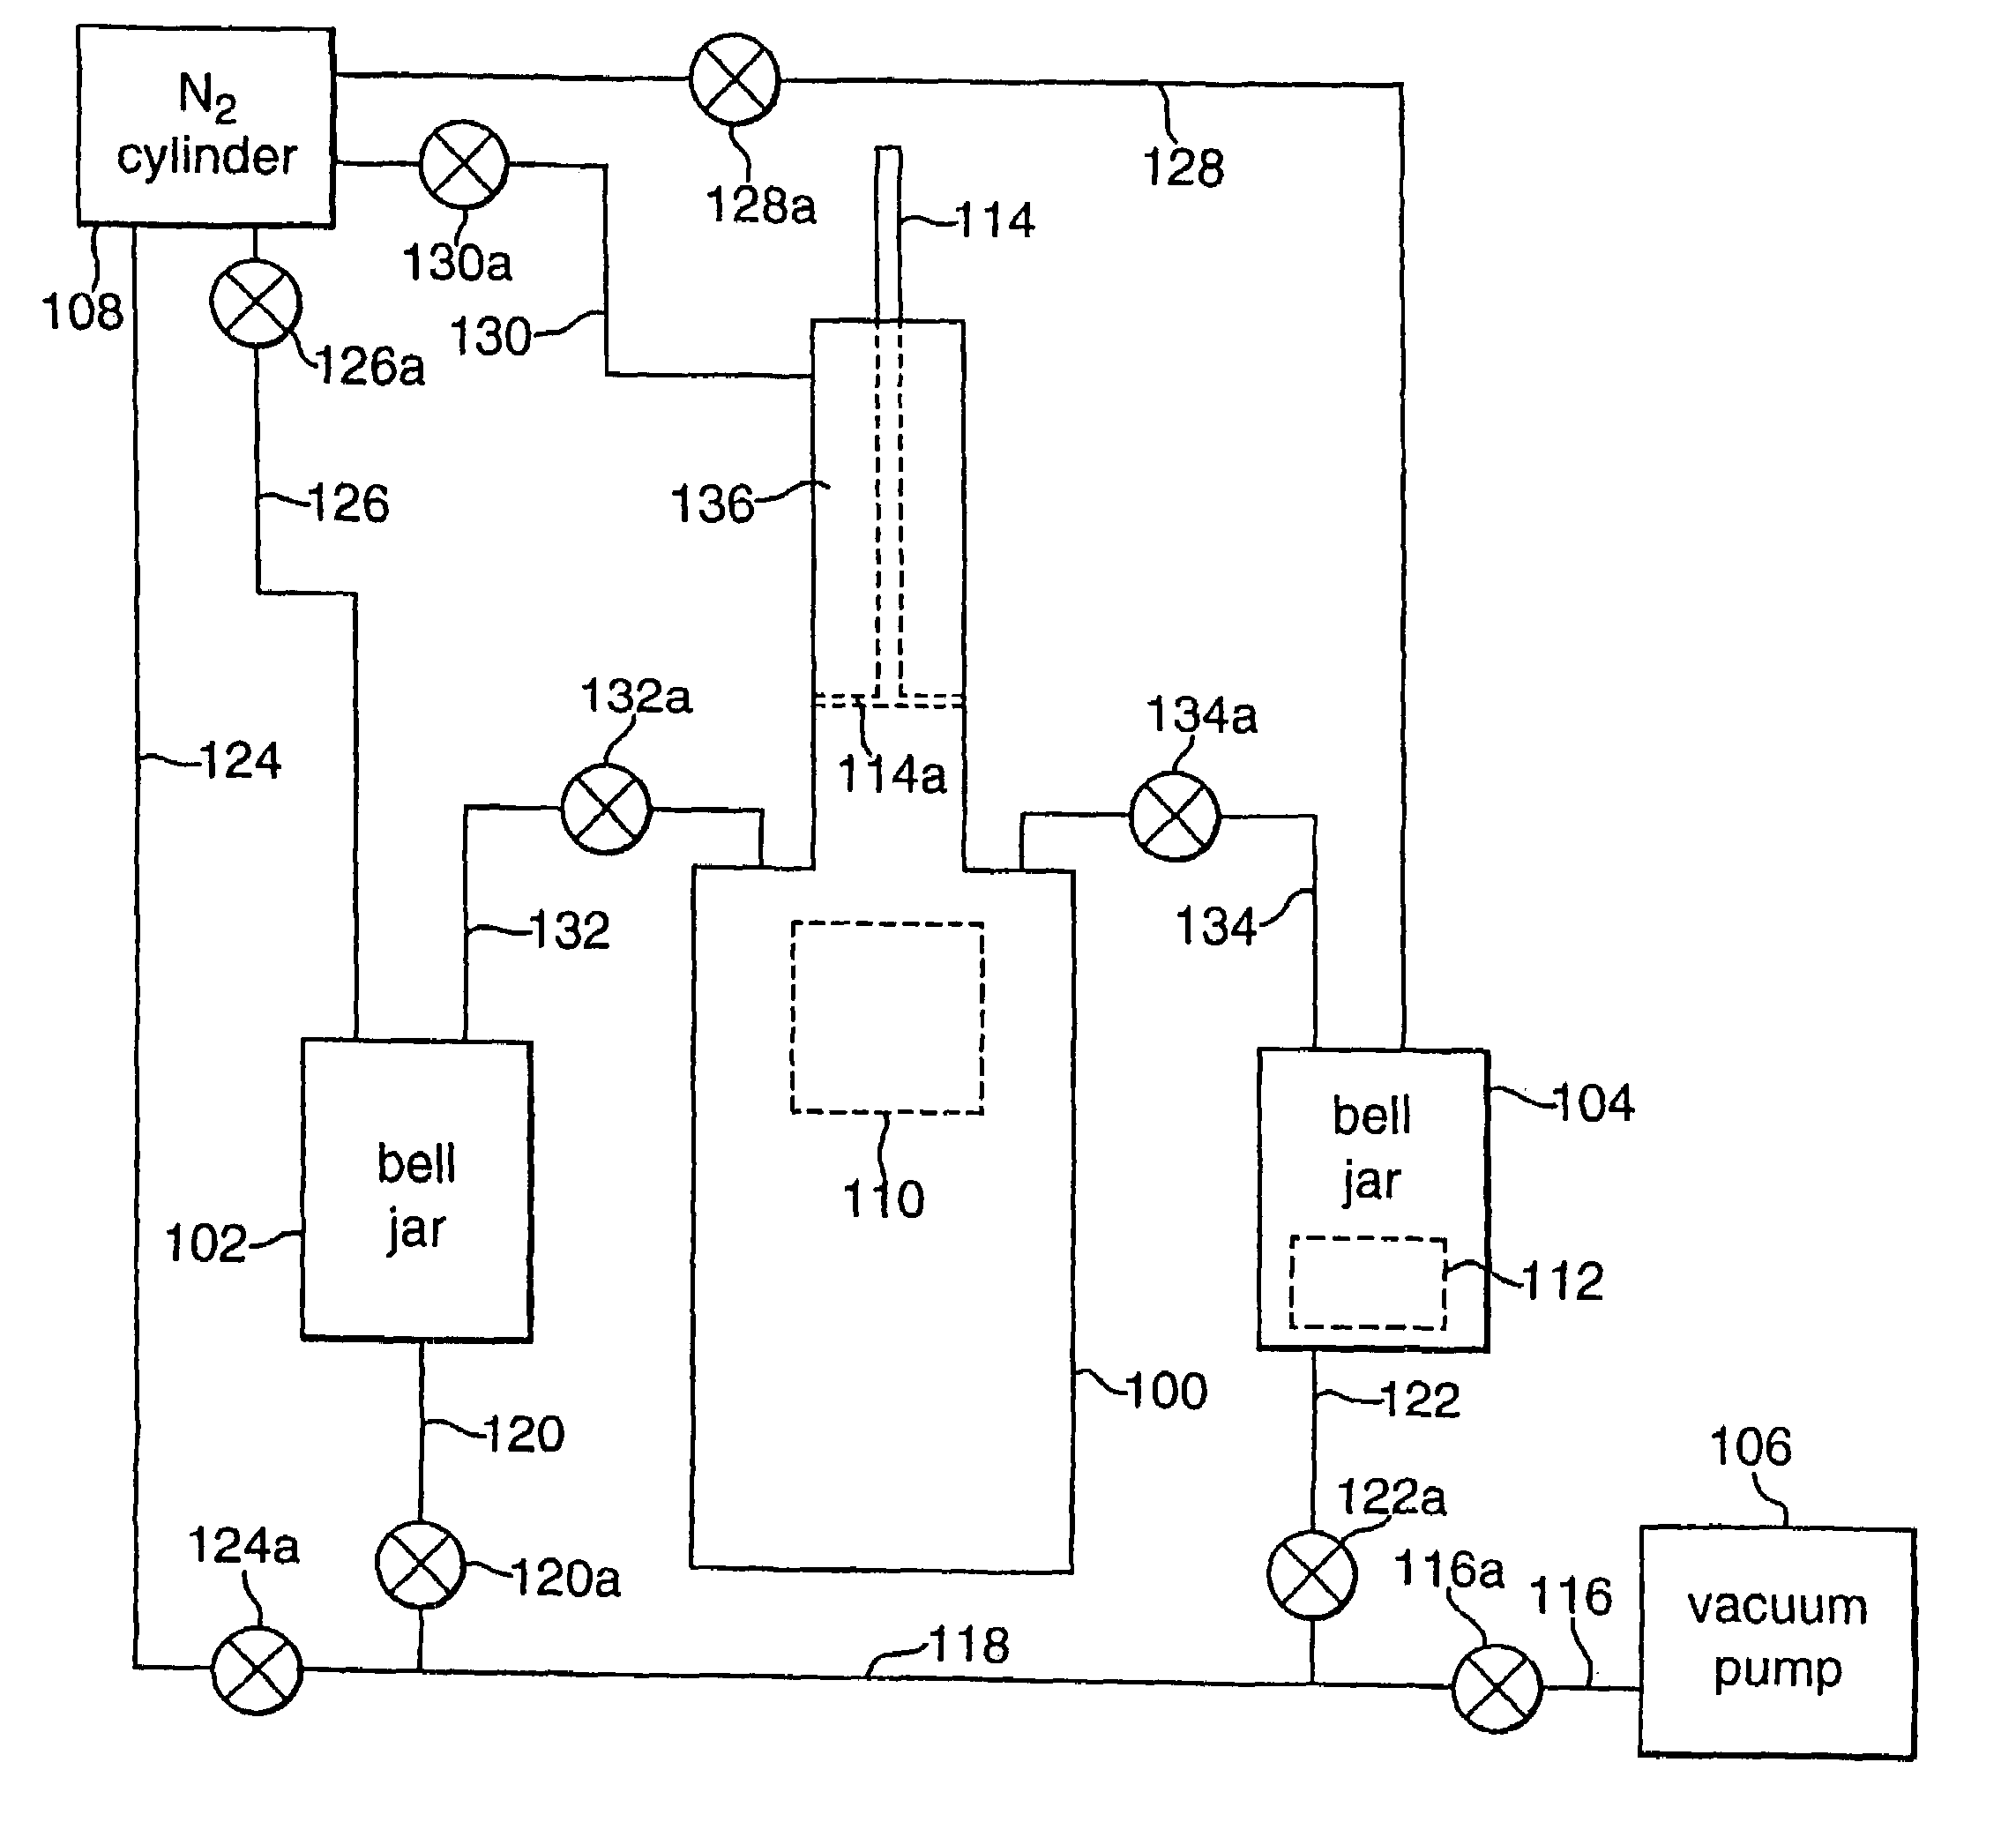 Method of potting a component